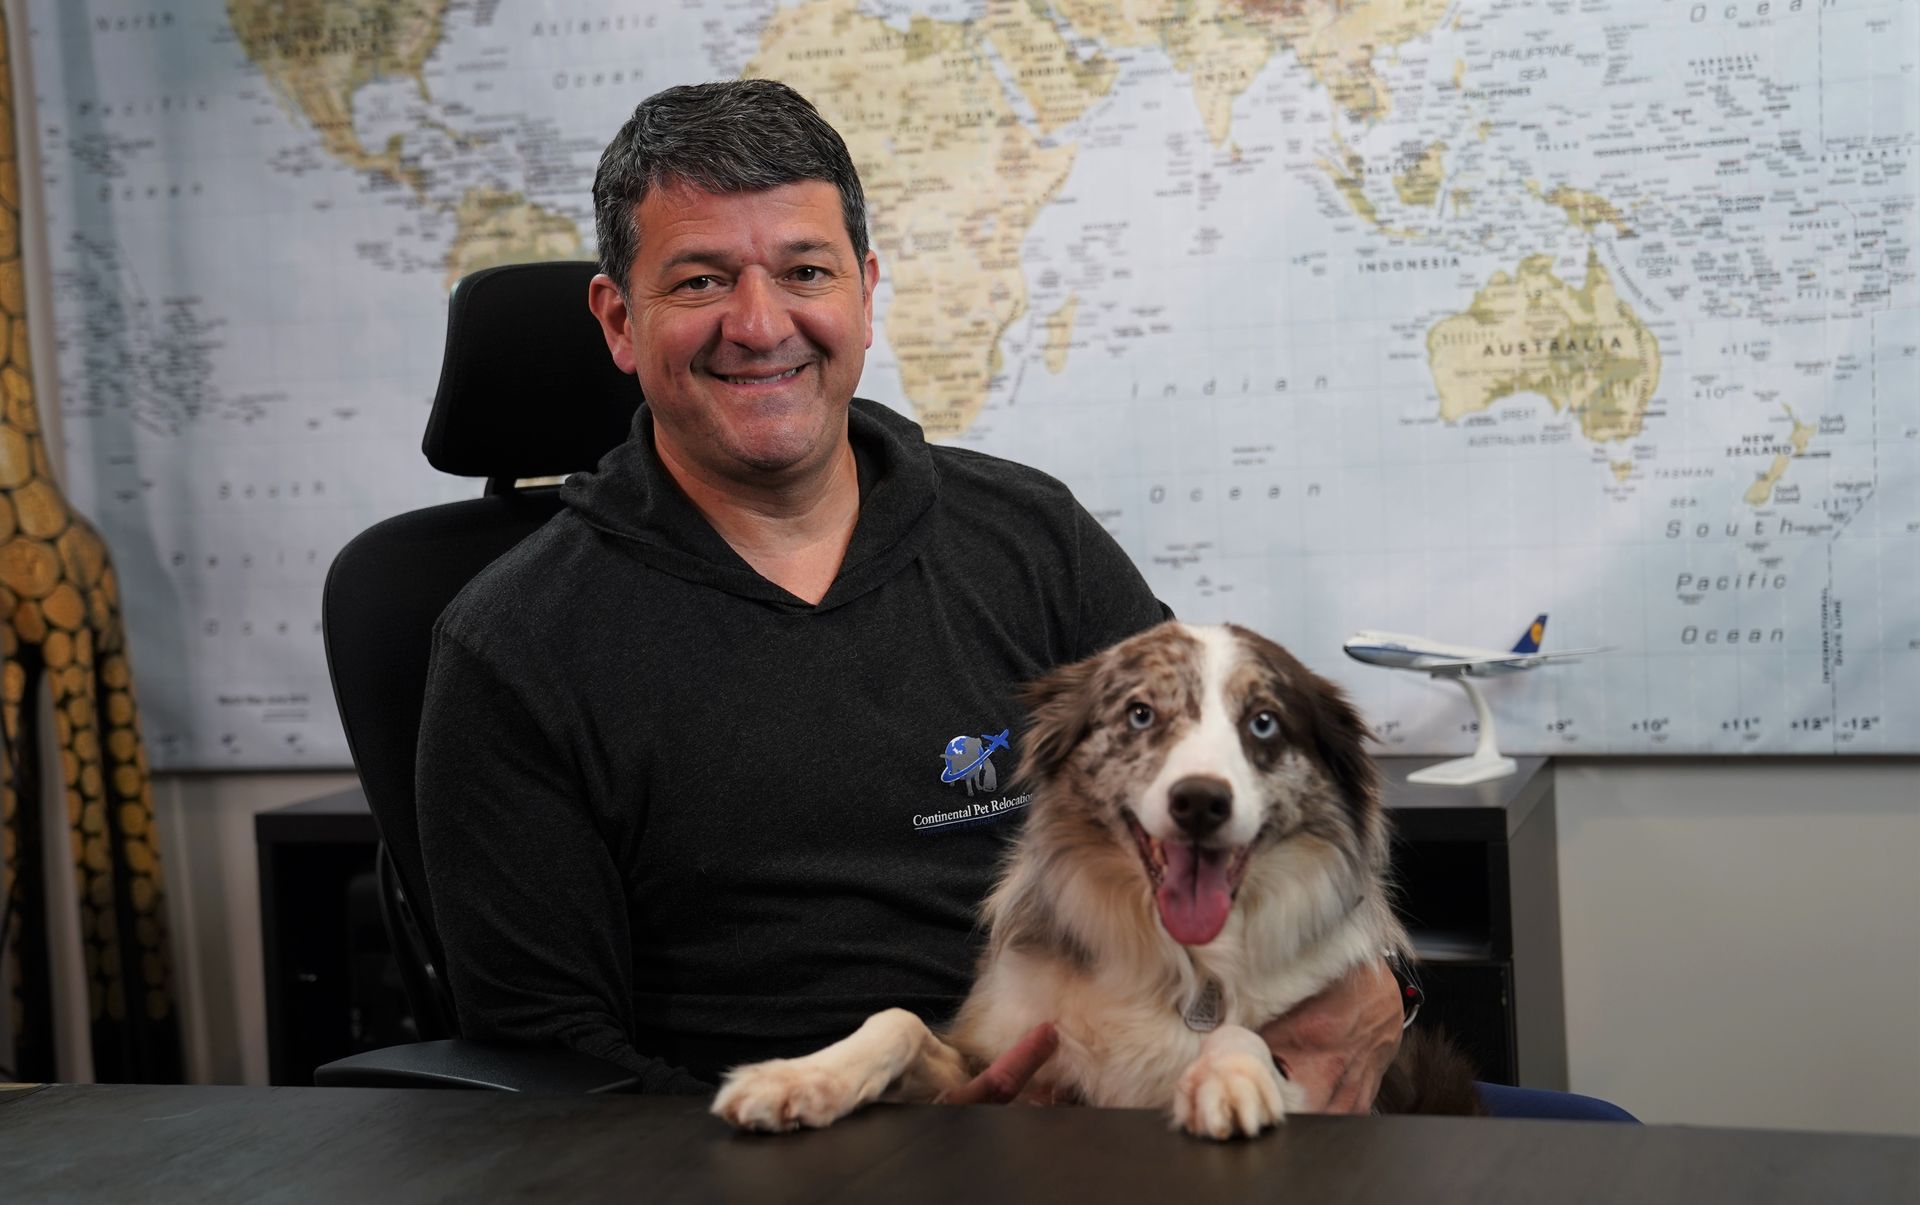 A man is sitting at a desk holding a dog.